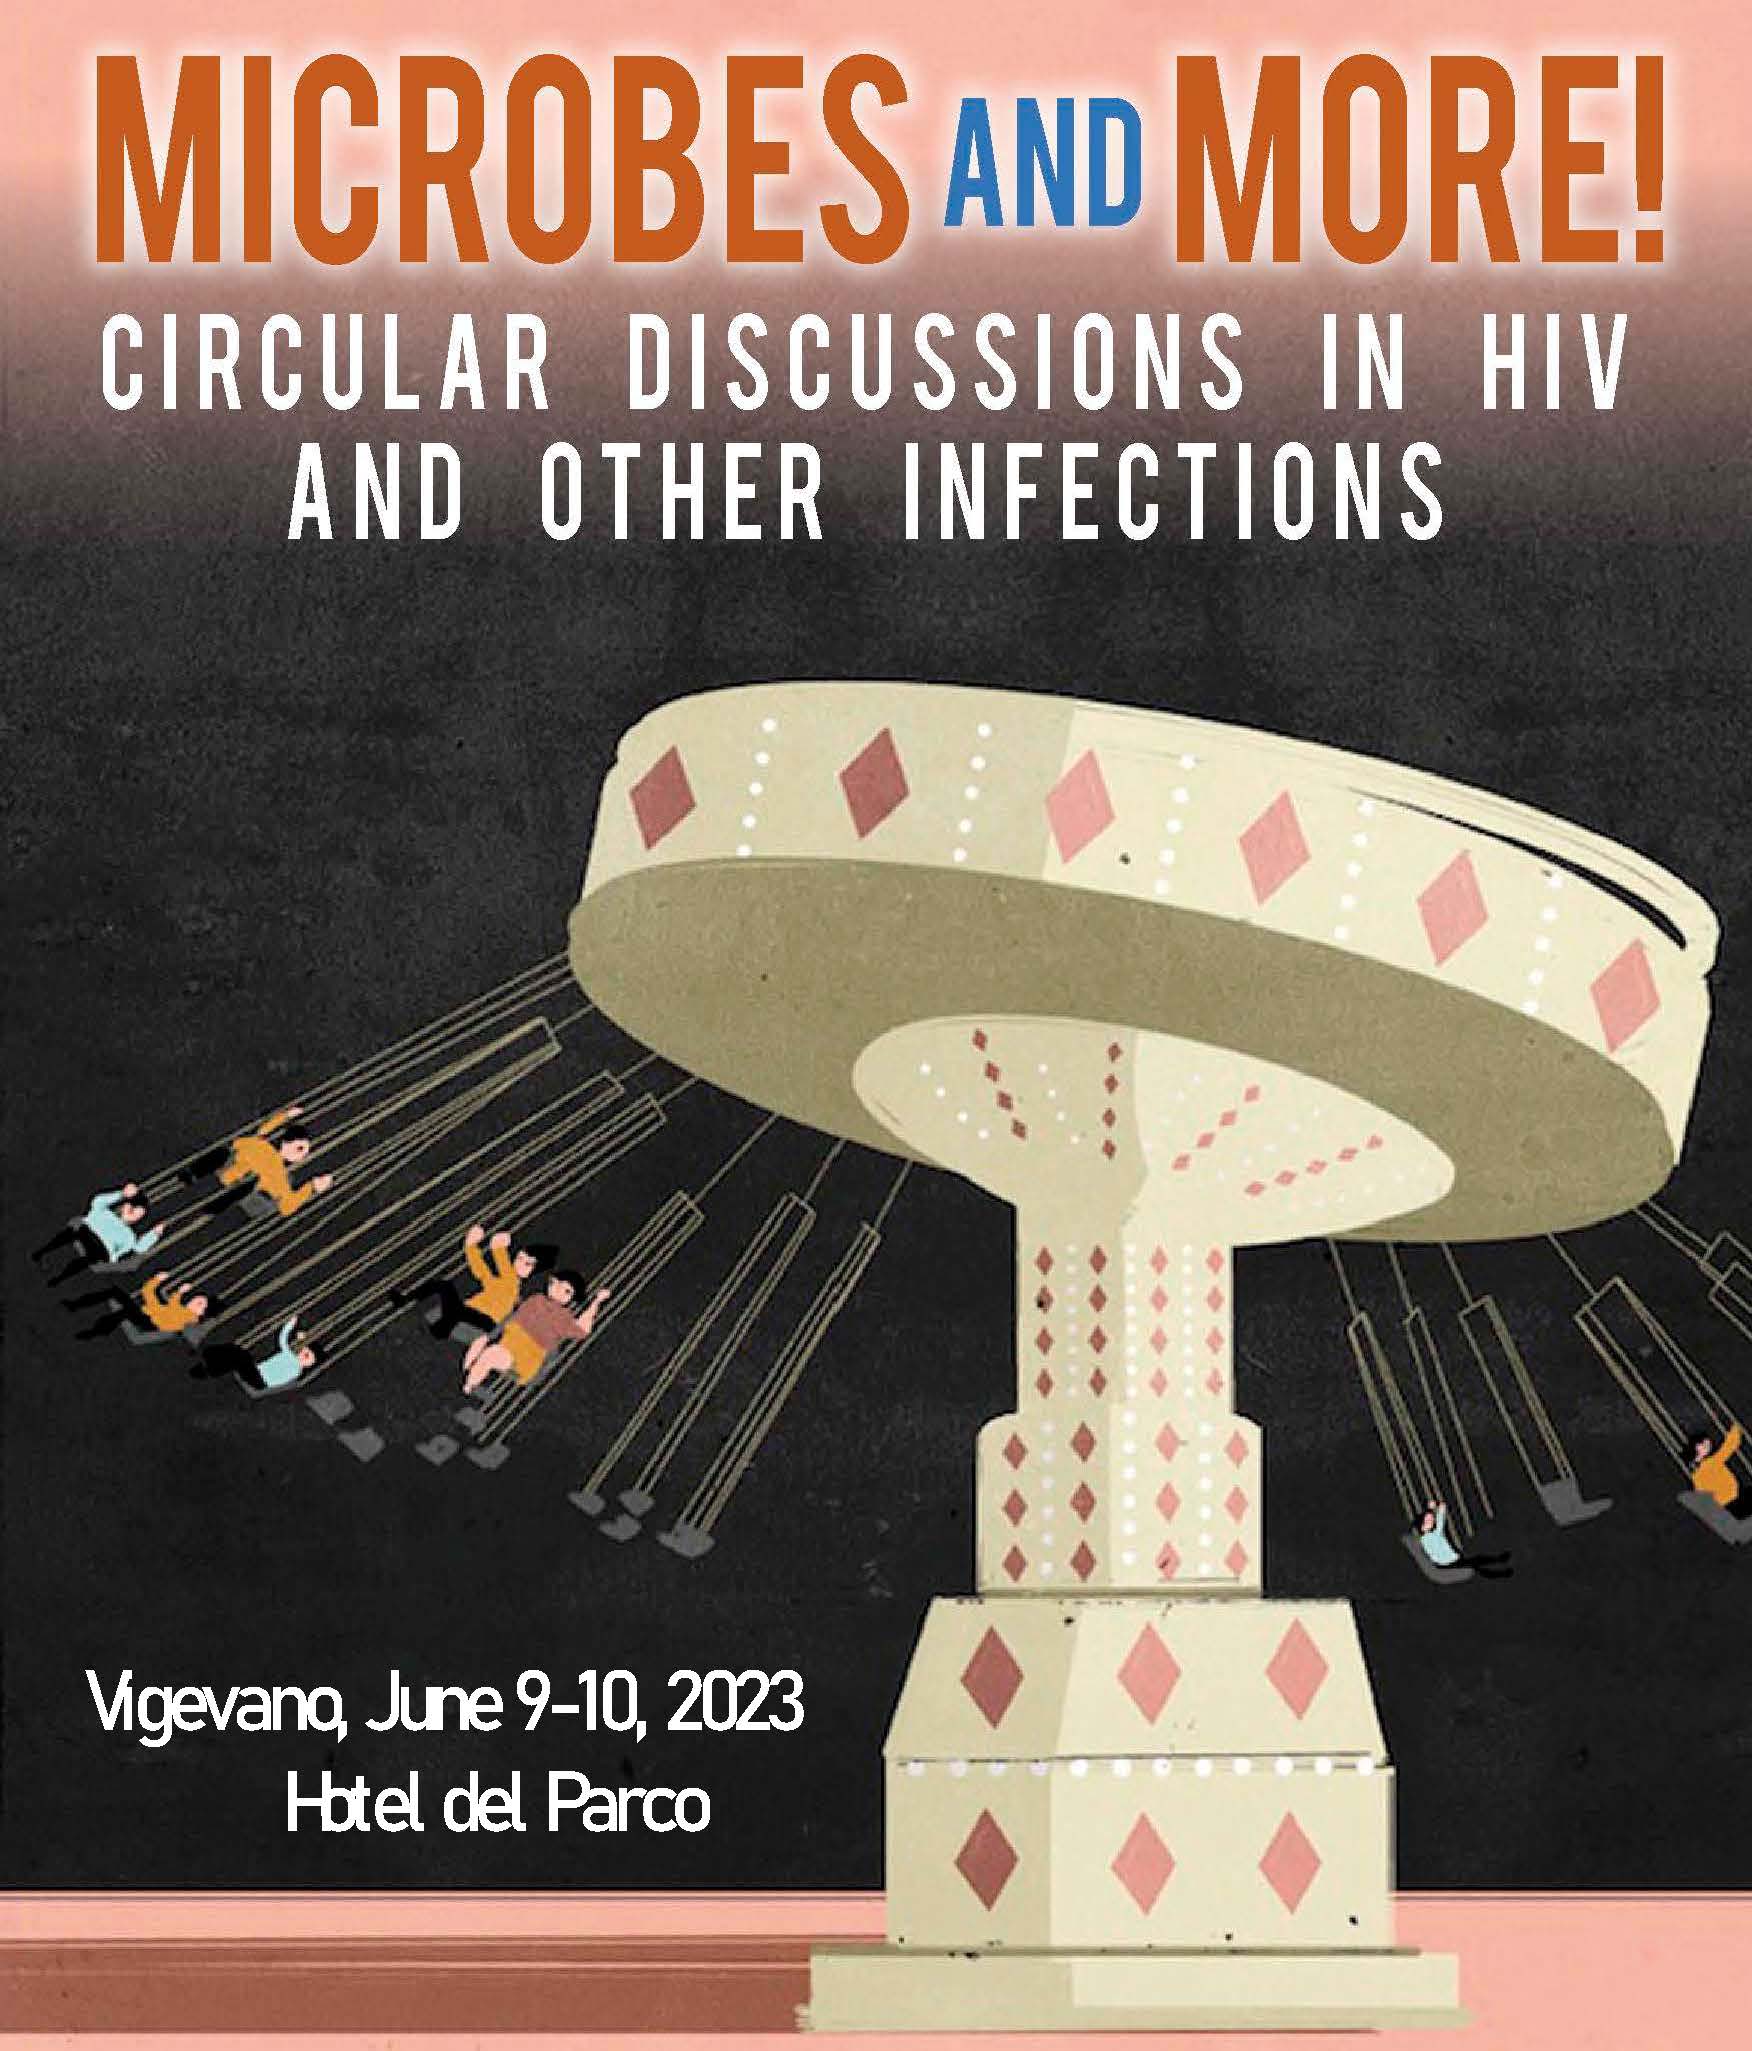 MICROBES AND MORE: CIRCULAR DISCUSSIONS IN HIV AND OTHER INFECTIONS